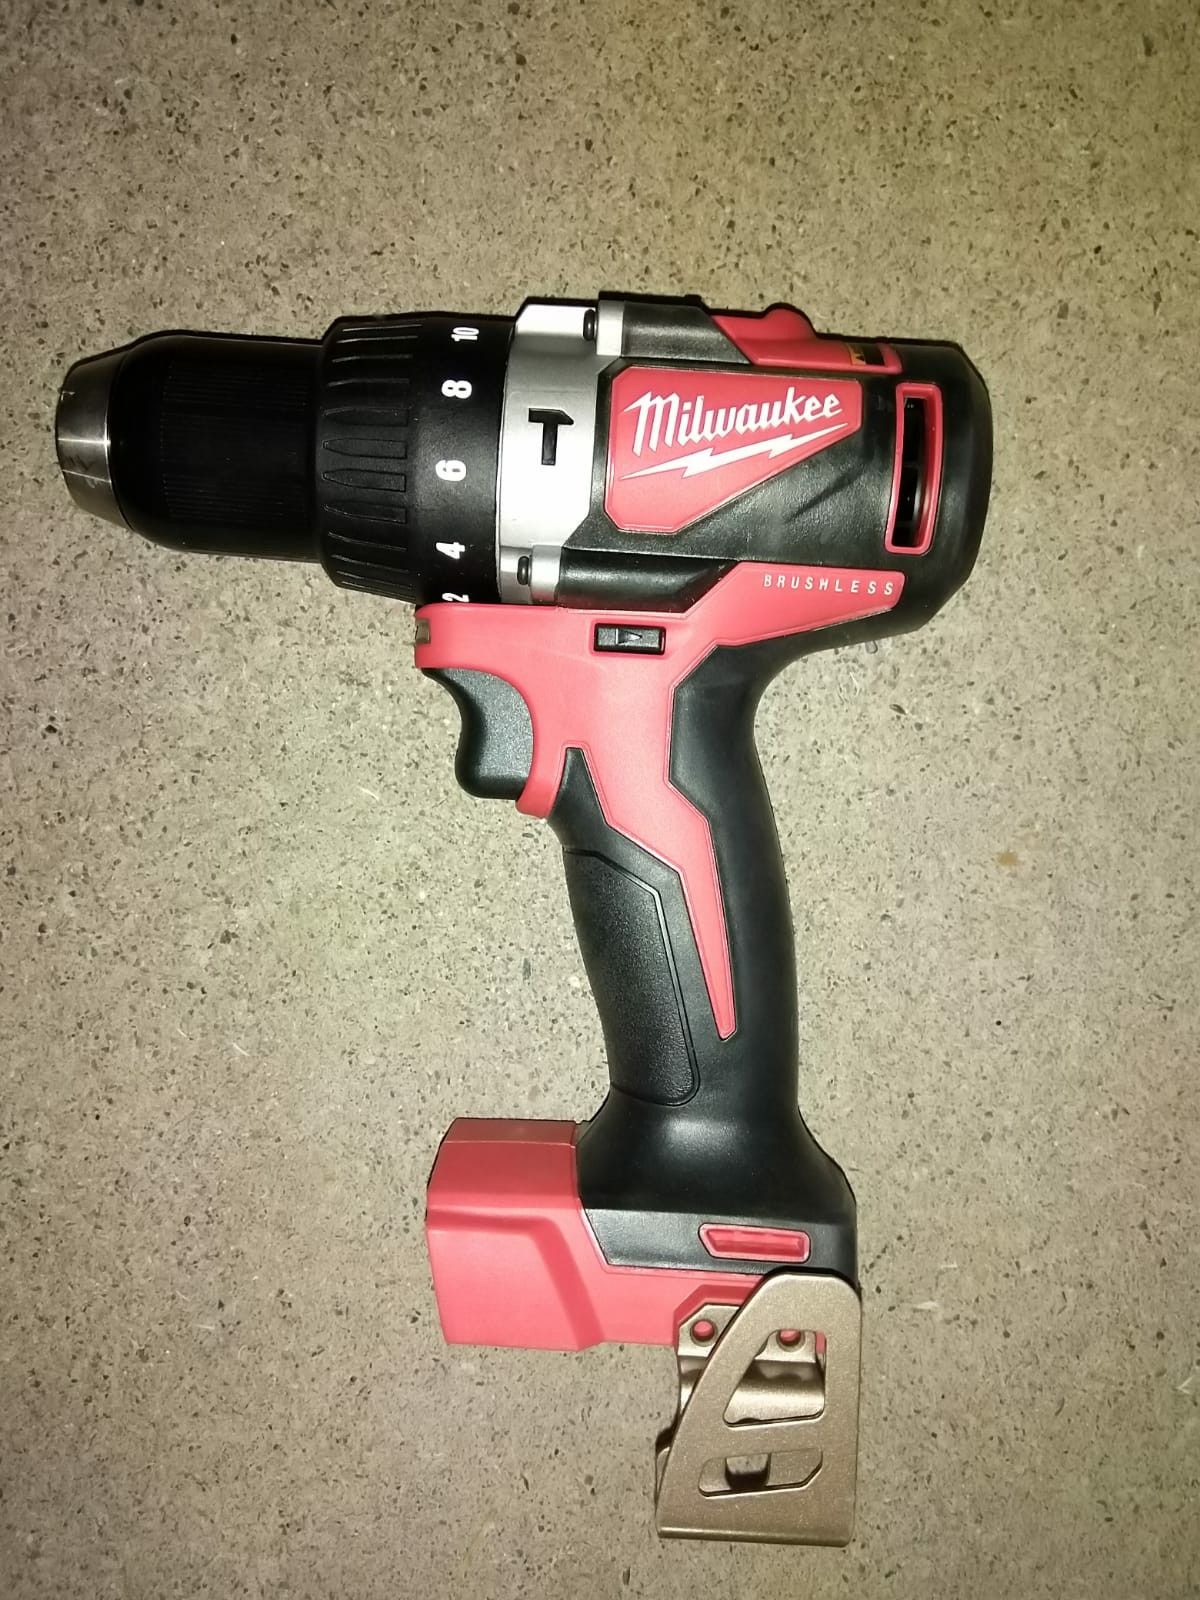 HAMMER DRILL MILWAUKEE BATTERY NOT INCLUDED